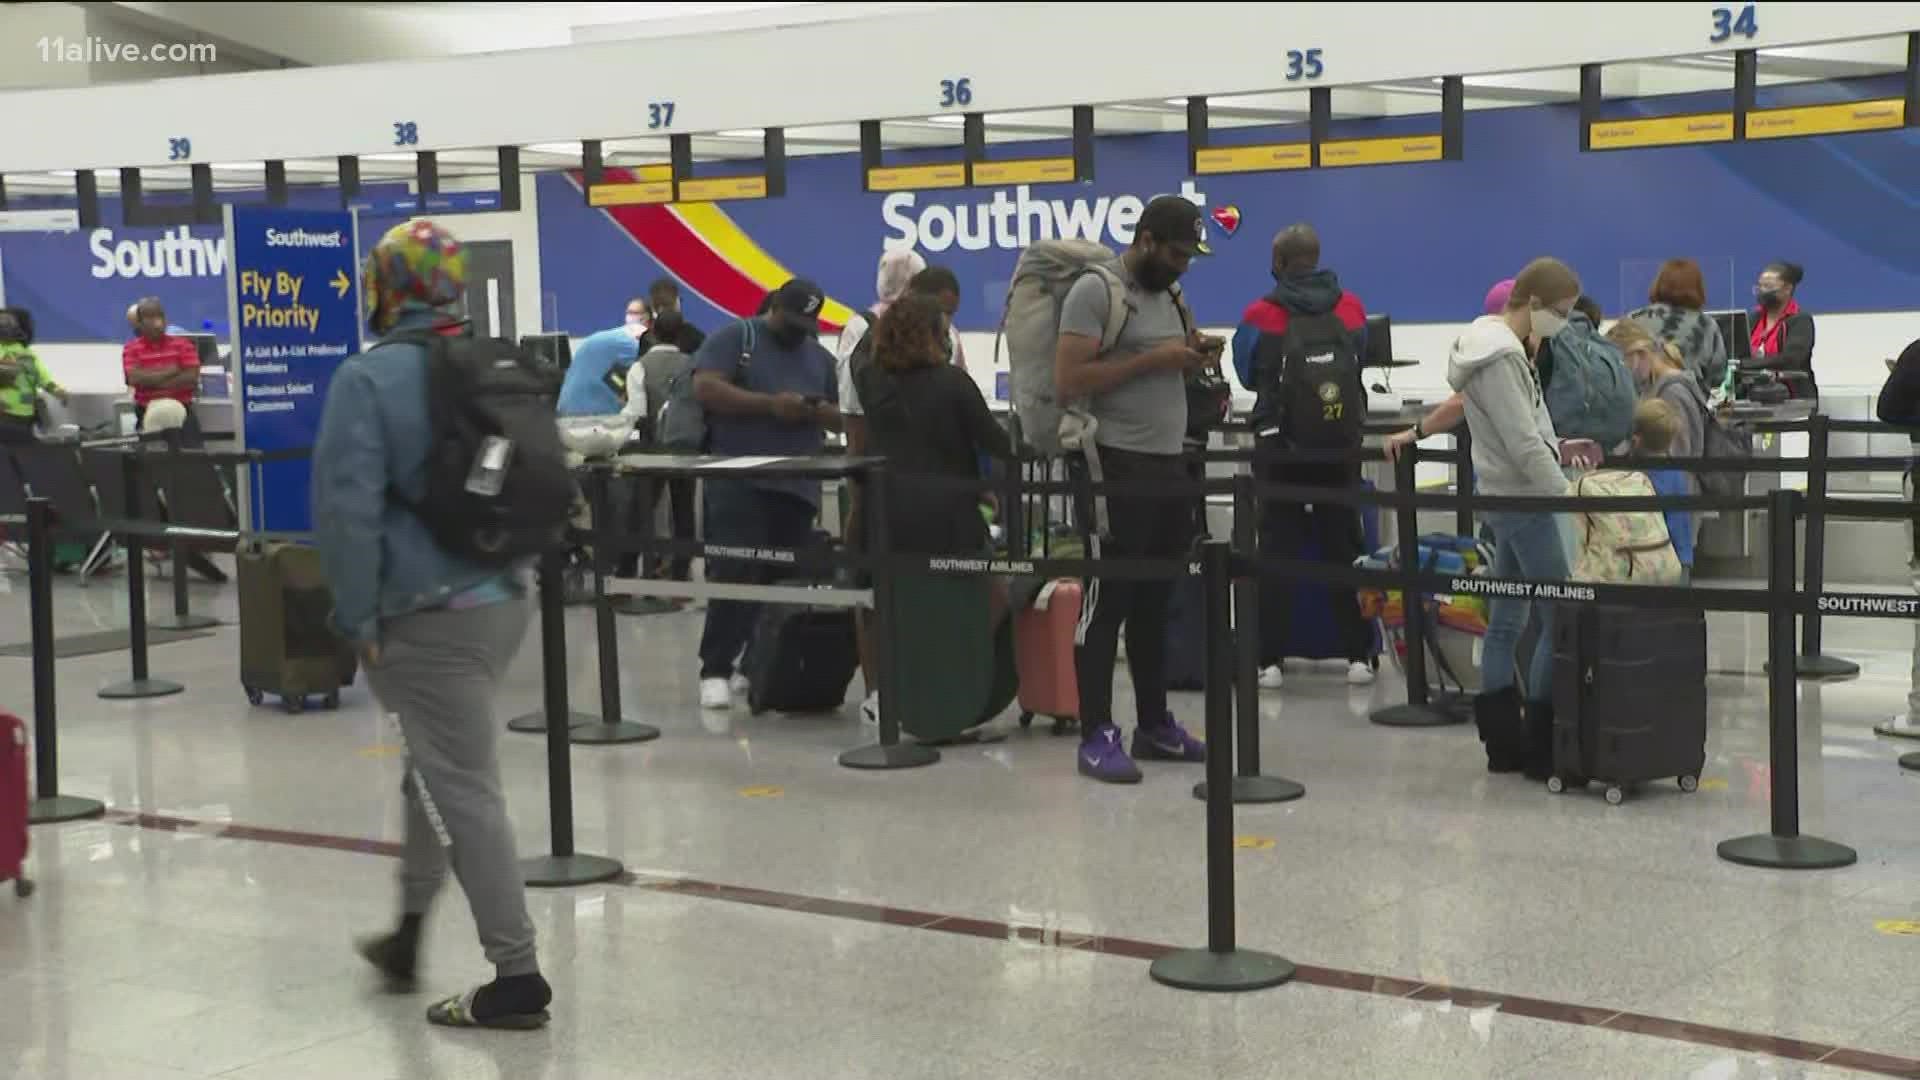 Southwest Airlines has canceled more flights, causing frustrations for hundreds of travelers.